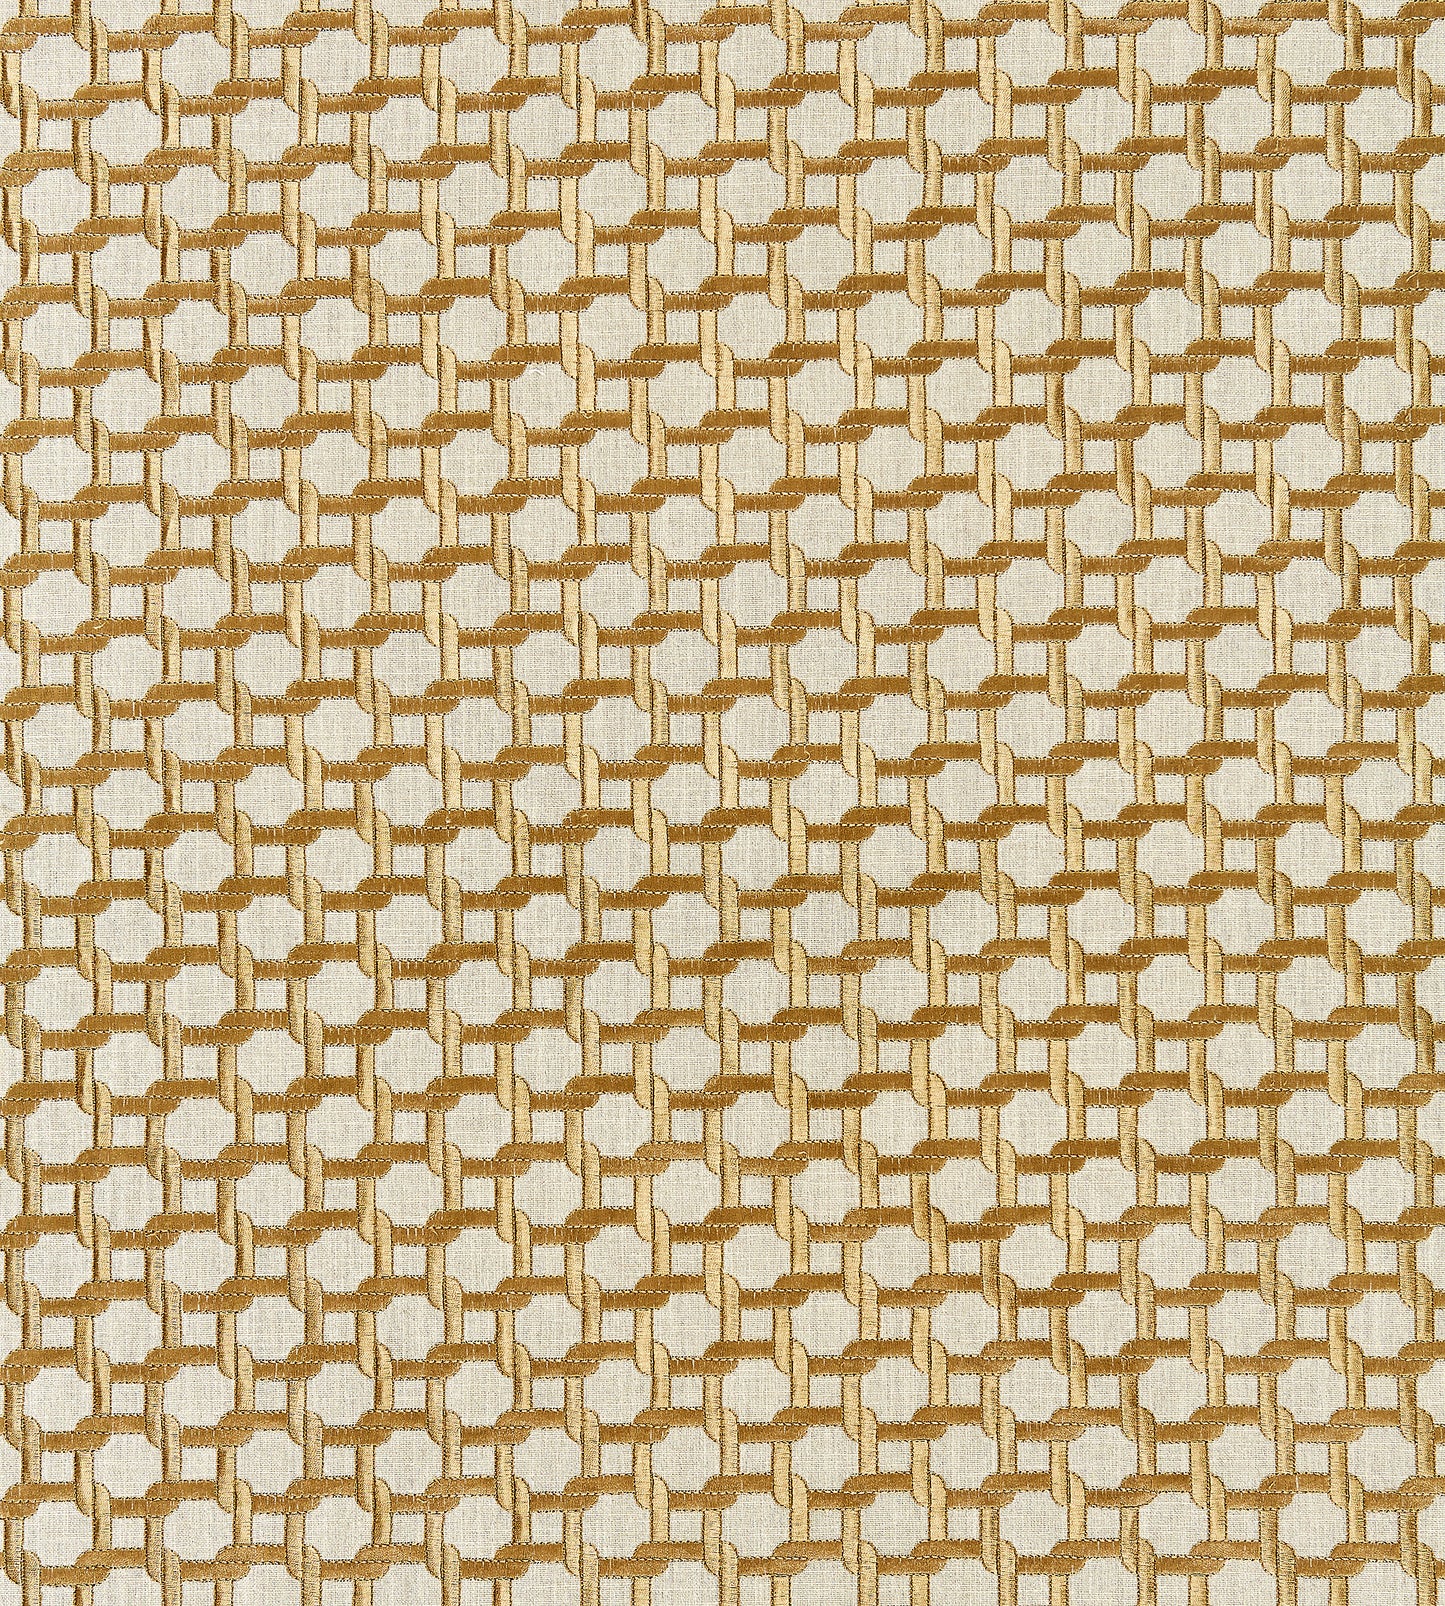 Purchase Scalamandre Fabric SKU SC 000527140, Link Embroidery Bronze 1